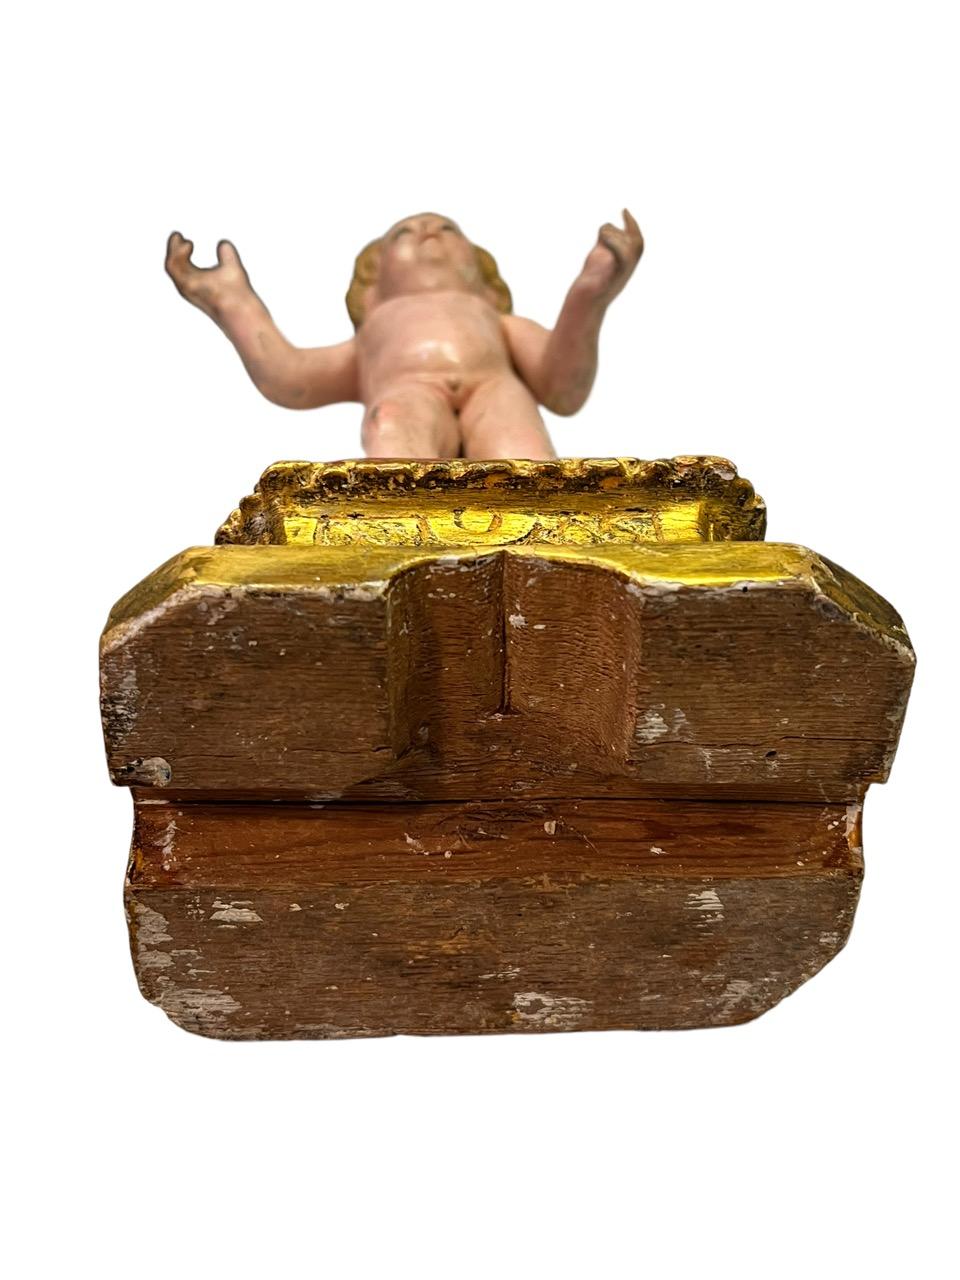 18th Century Italian Carved Wood and Polychromed Figure Depicting Baby Jesus For Sale 10